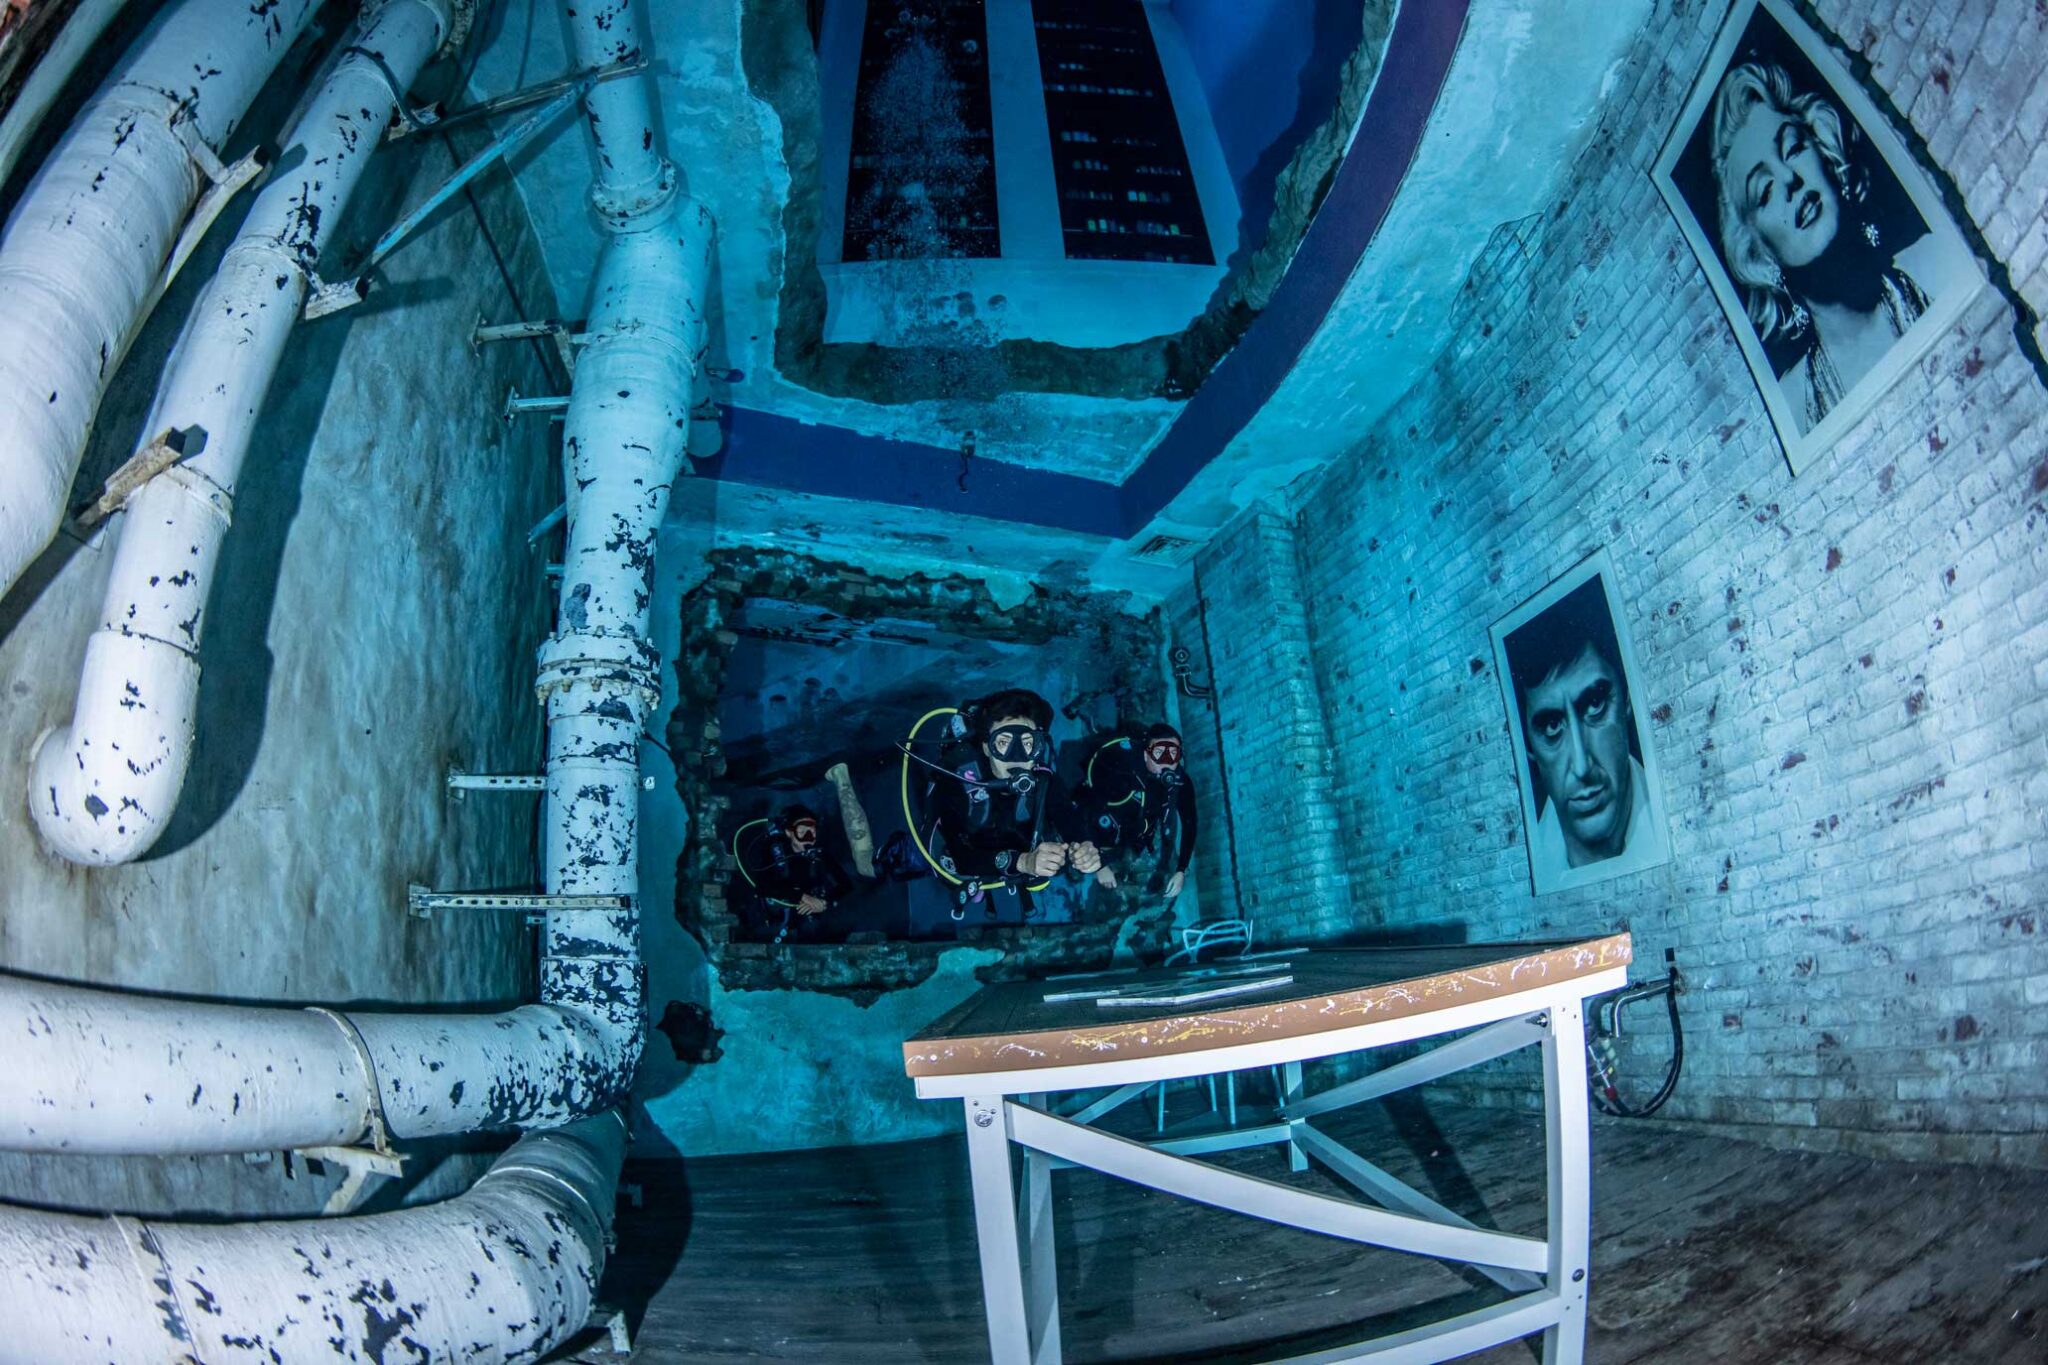 Scuba divers explore the sunken city at Deep Dive Dubai, which holds the Guinness World Record for the deepest pool ever